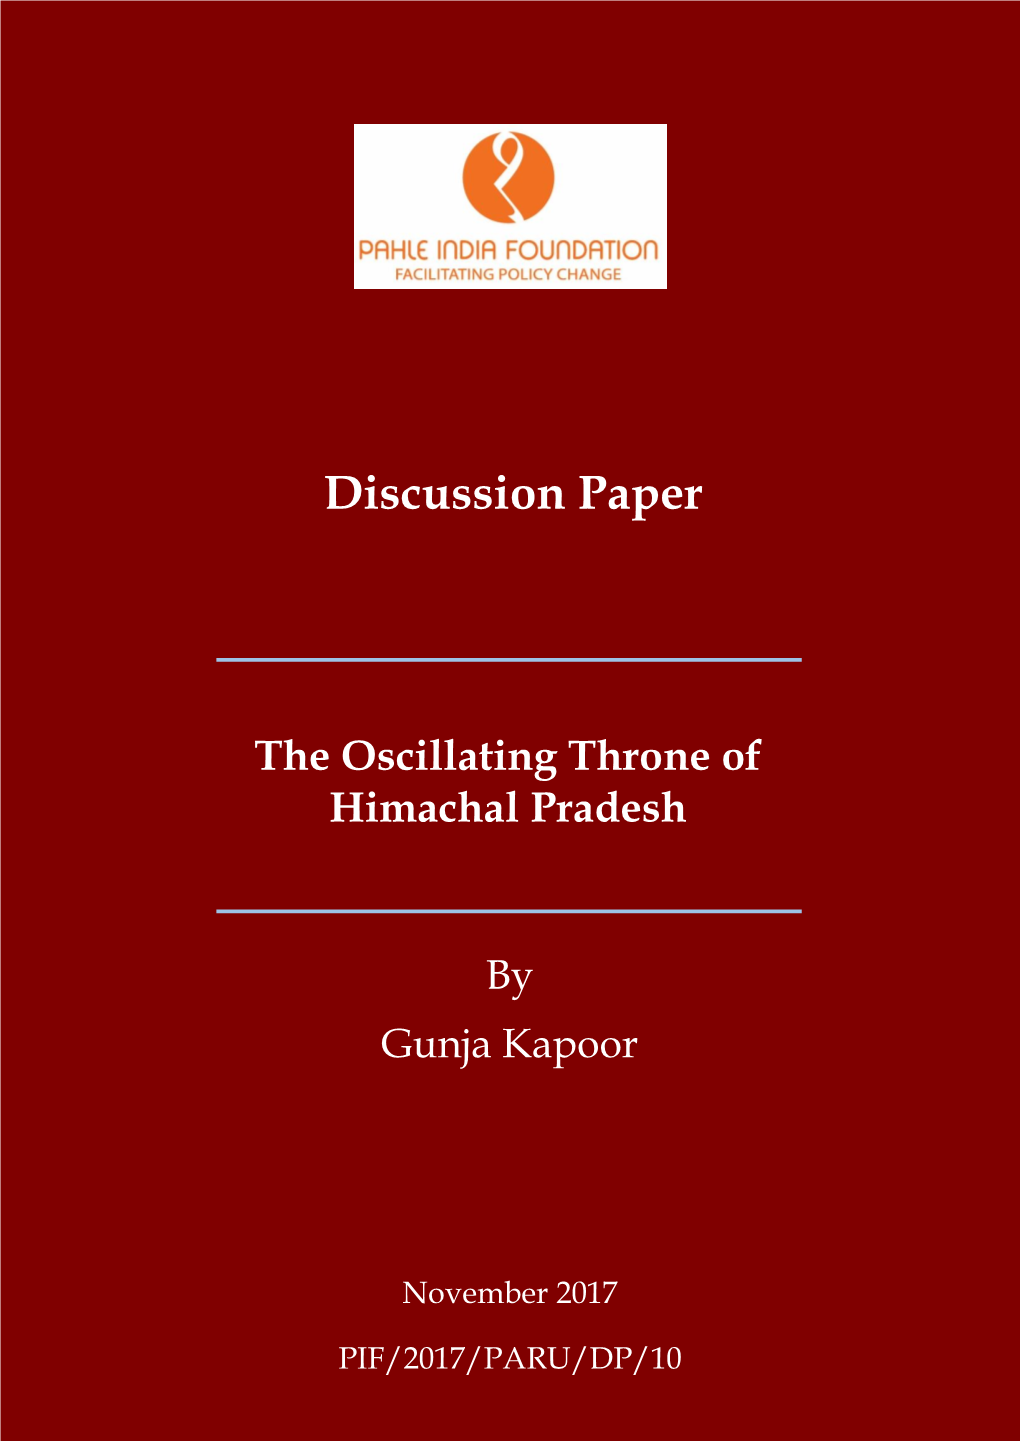 Discussion Paper the Oscillating Throne of Himachal Pradesh